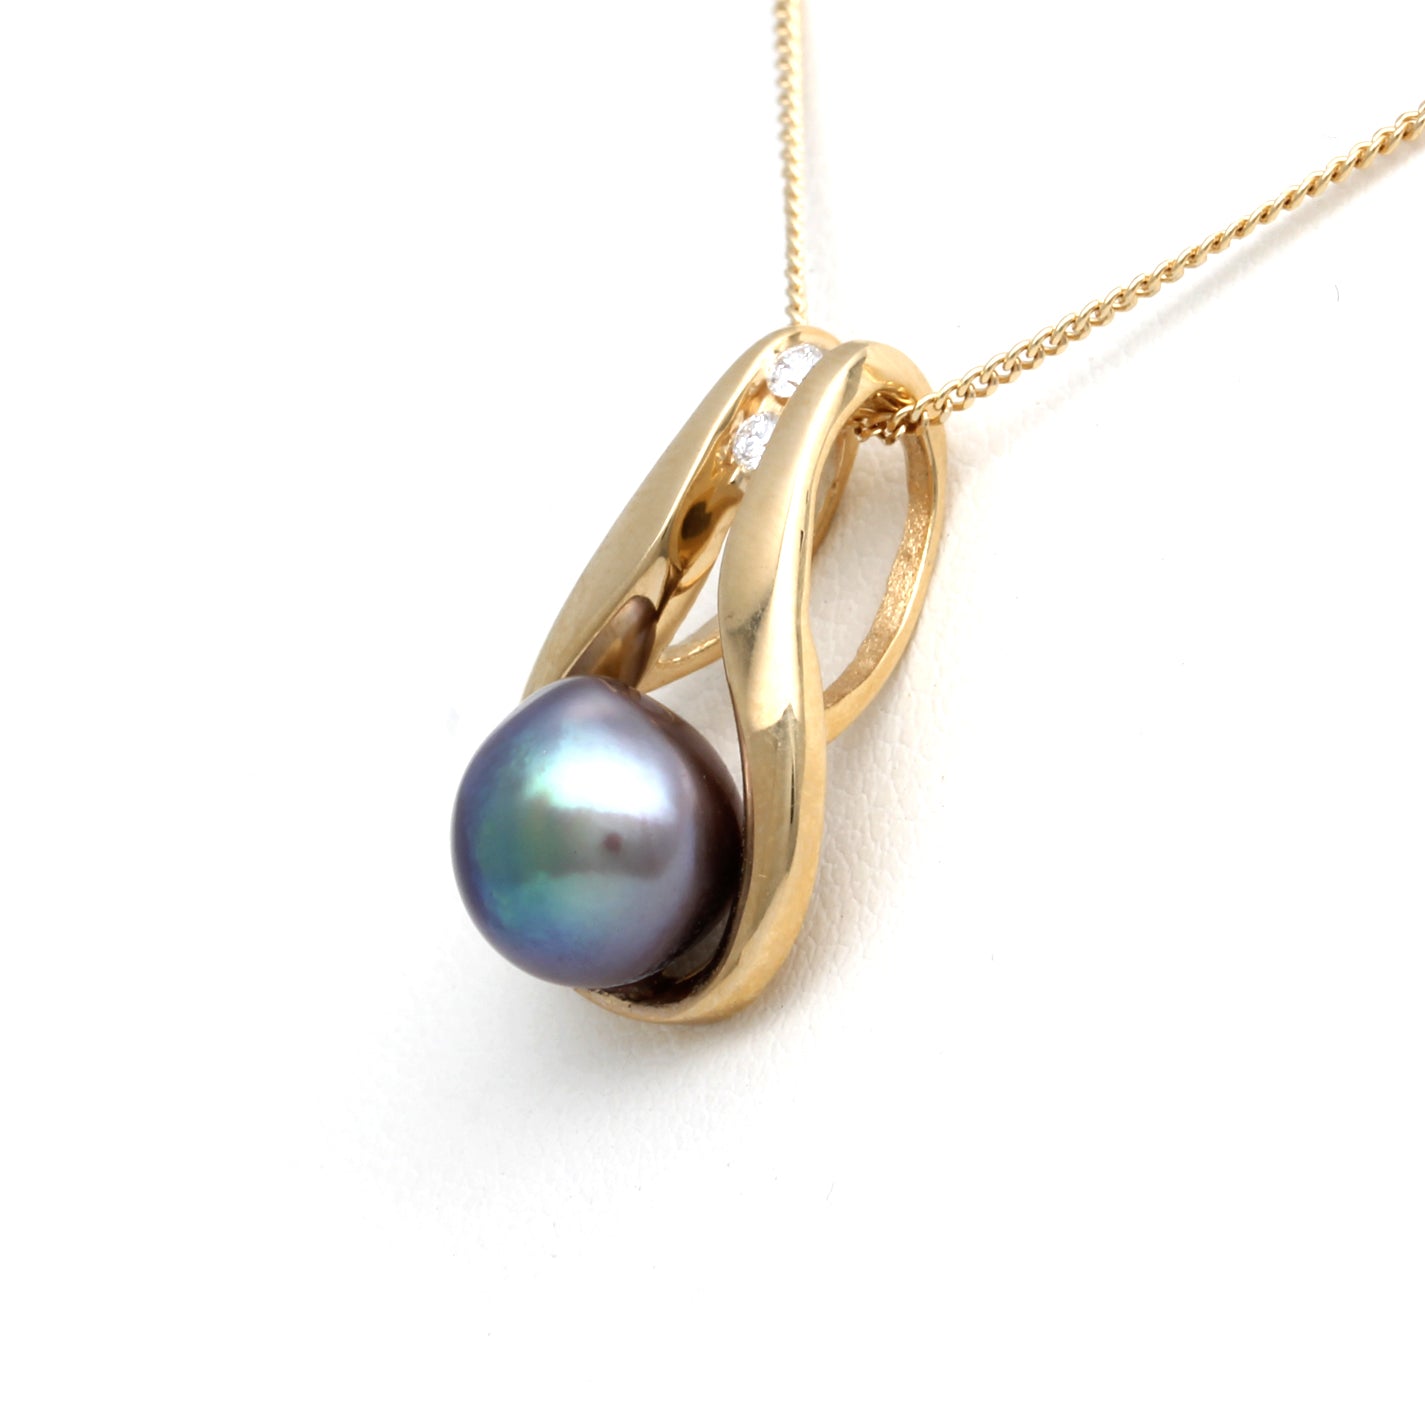 Iridescent Cortez Pearl on 18K Yellow Gold Pendant with Diamonds by Kathe Mai